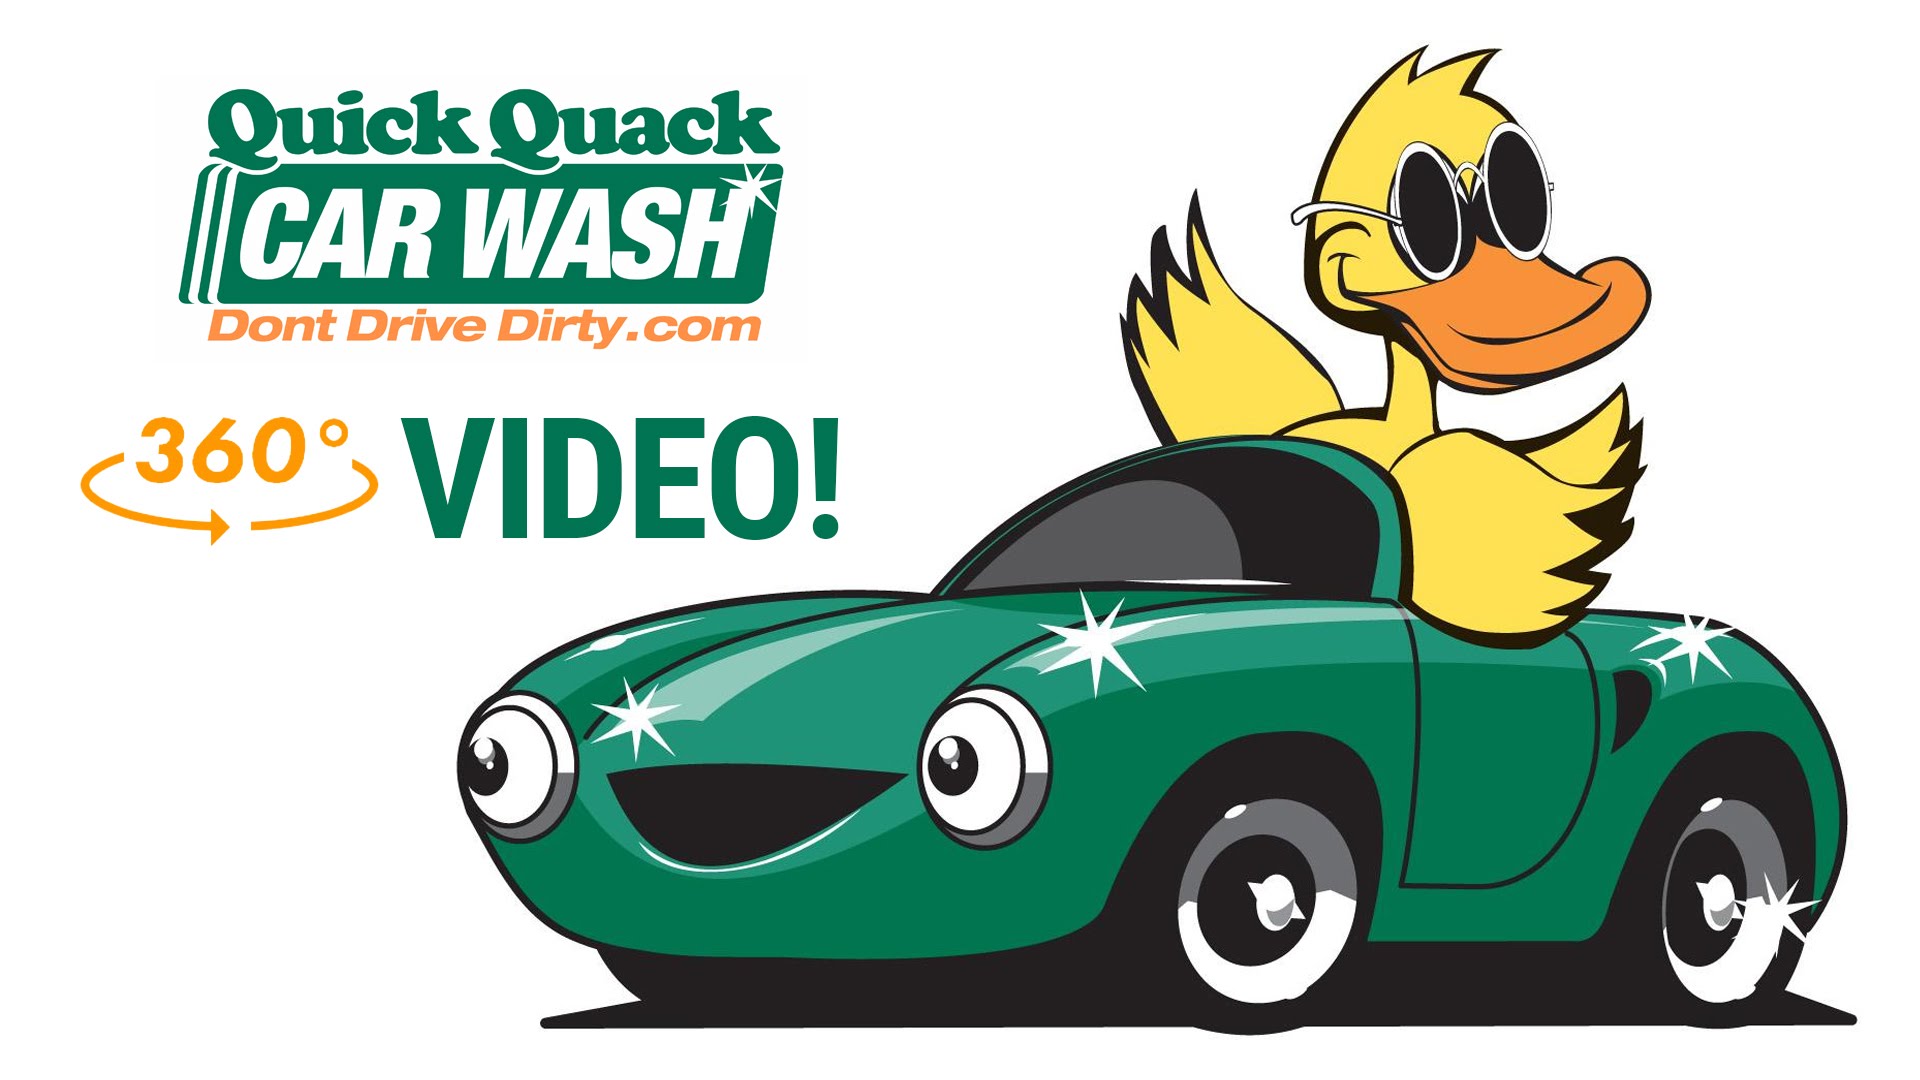 Awesome clipart car wash. Quick quack youtube 